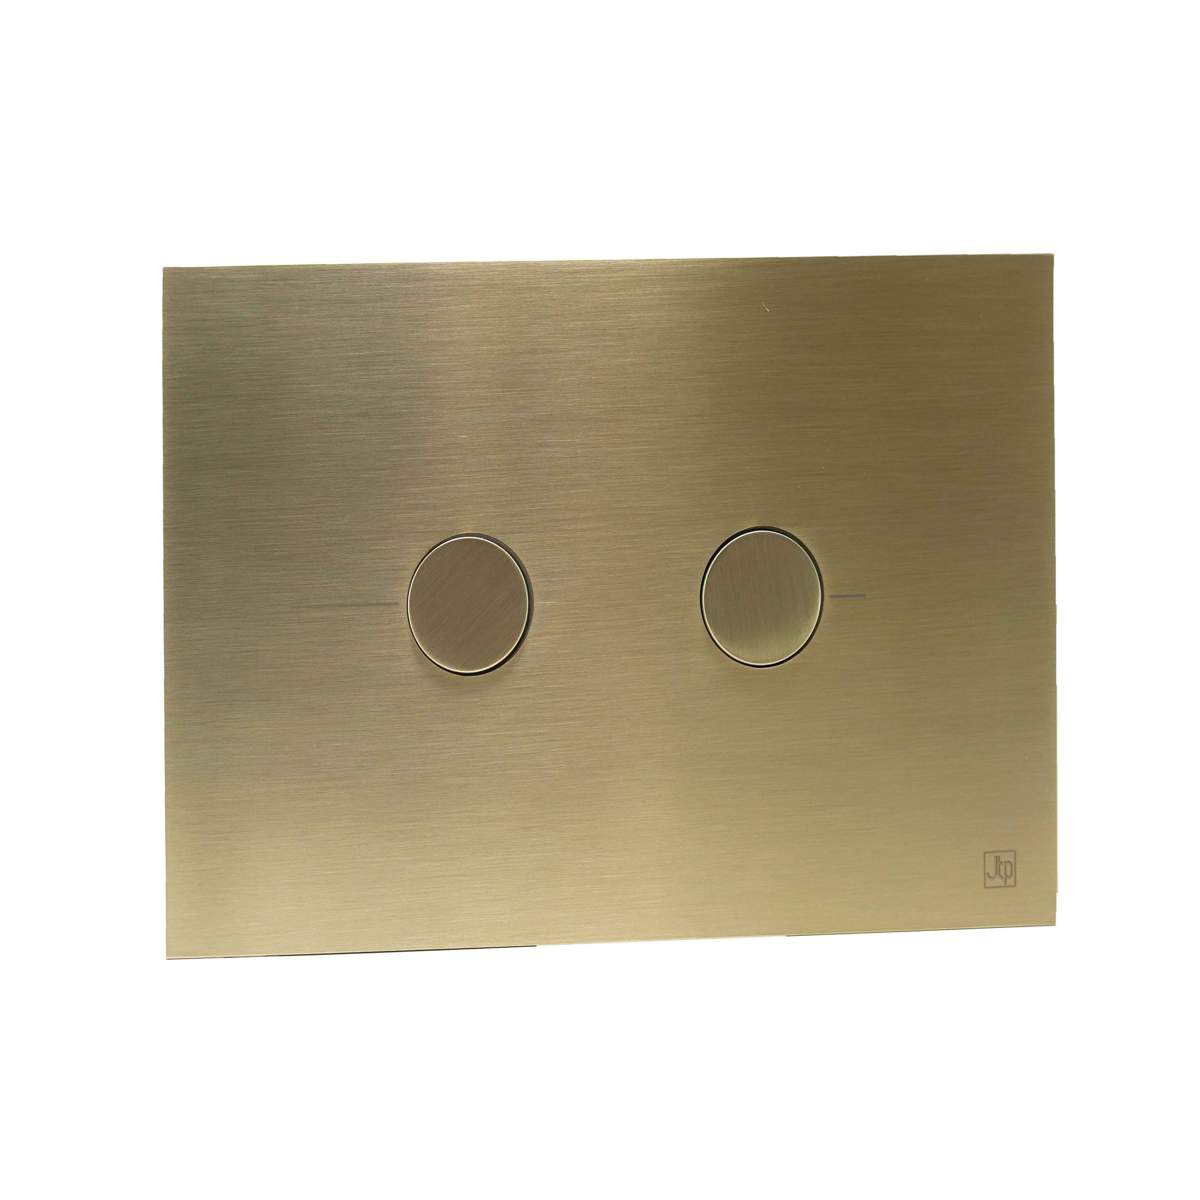 JTP Vos Brushed Brass Metal Pneumatic Flush Plate with WC Frame (FPBBR)